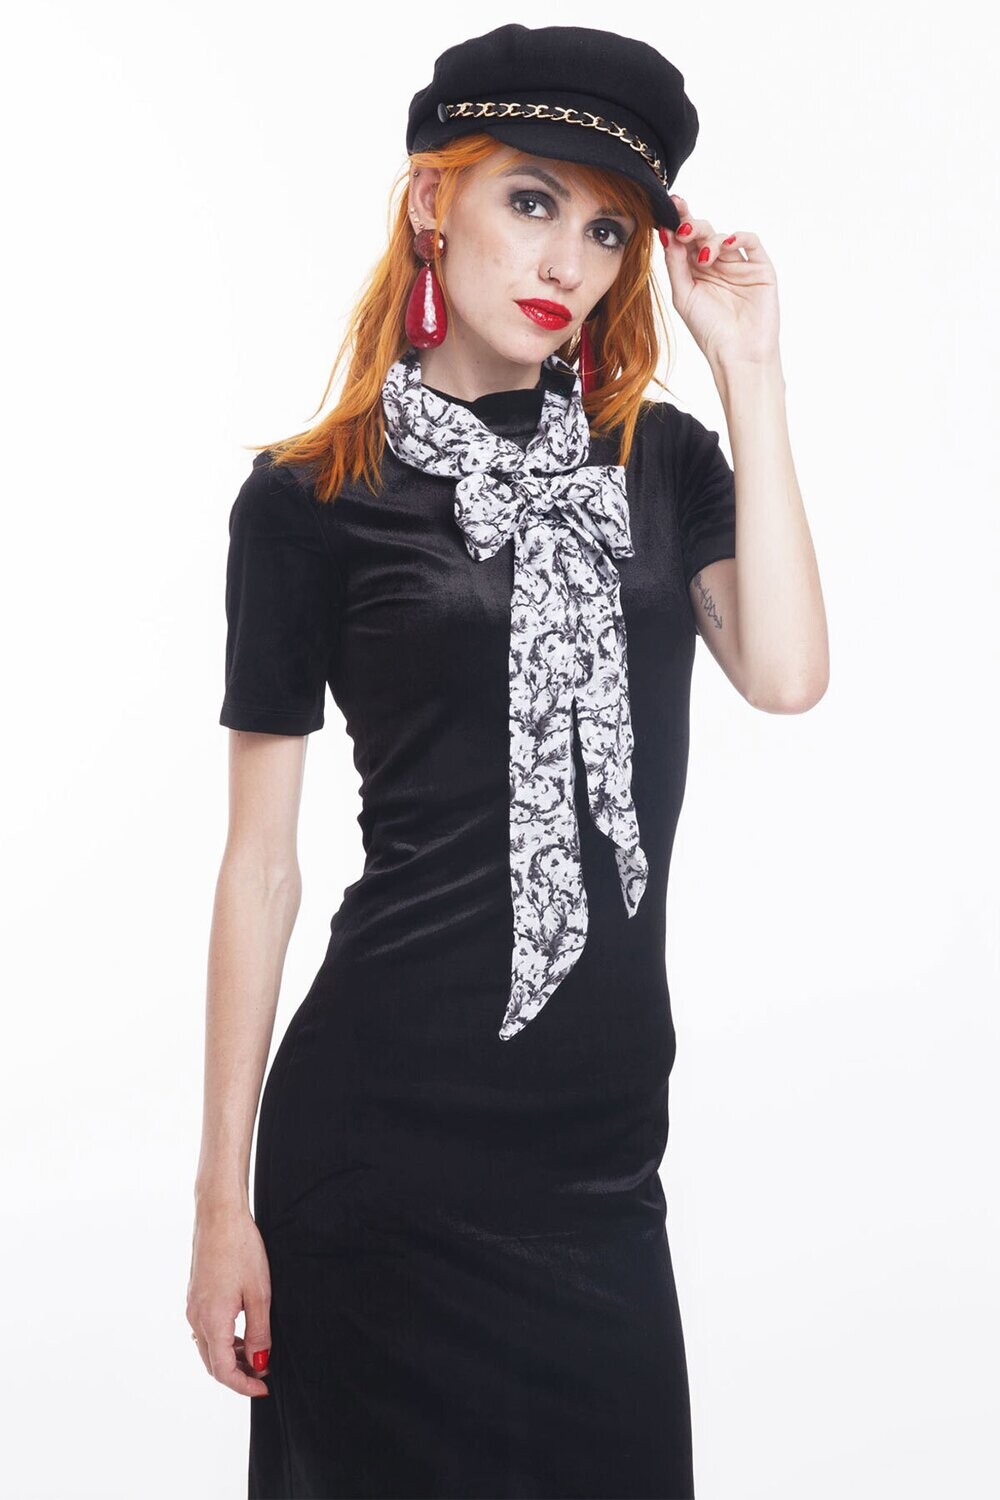 Women's Gothic Scarf with Striking Black and White Floral Pattern 8x220cm